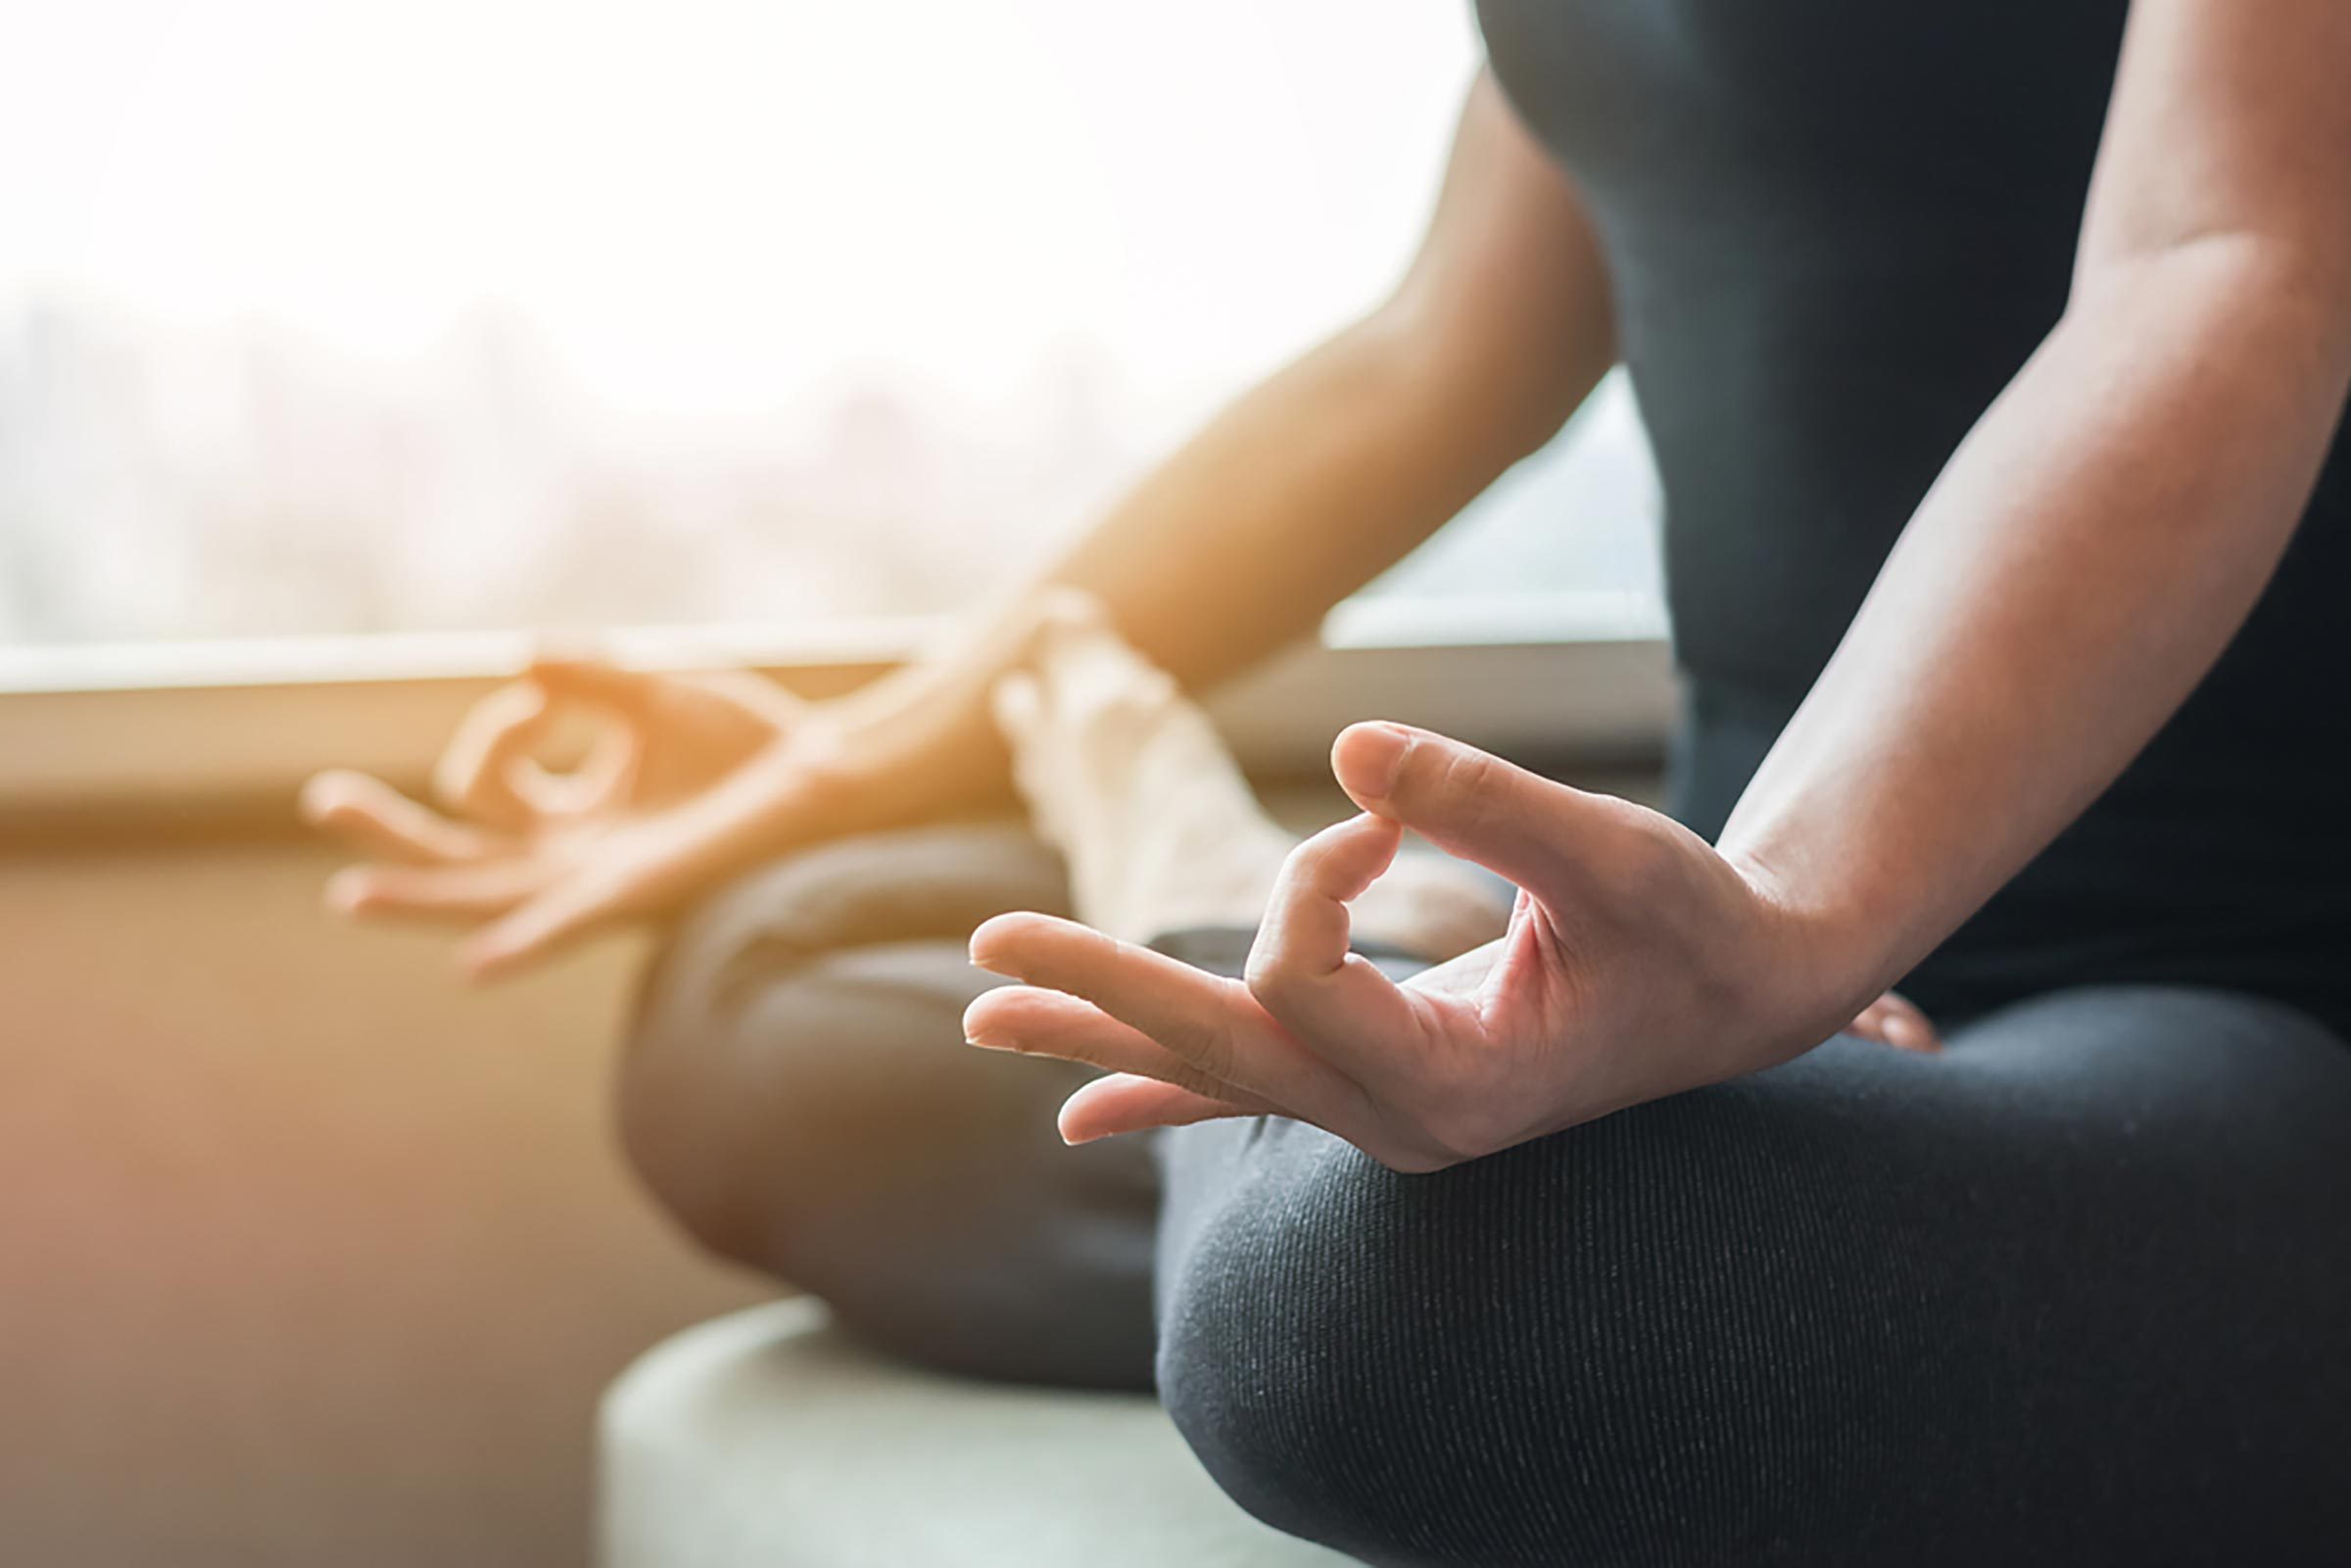 12 Little Things That Can Happen to Your Body After Just 15 Minutes of Meditation